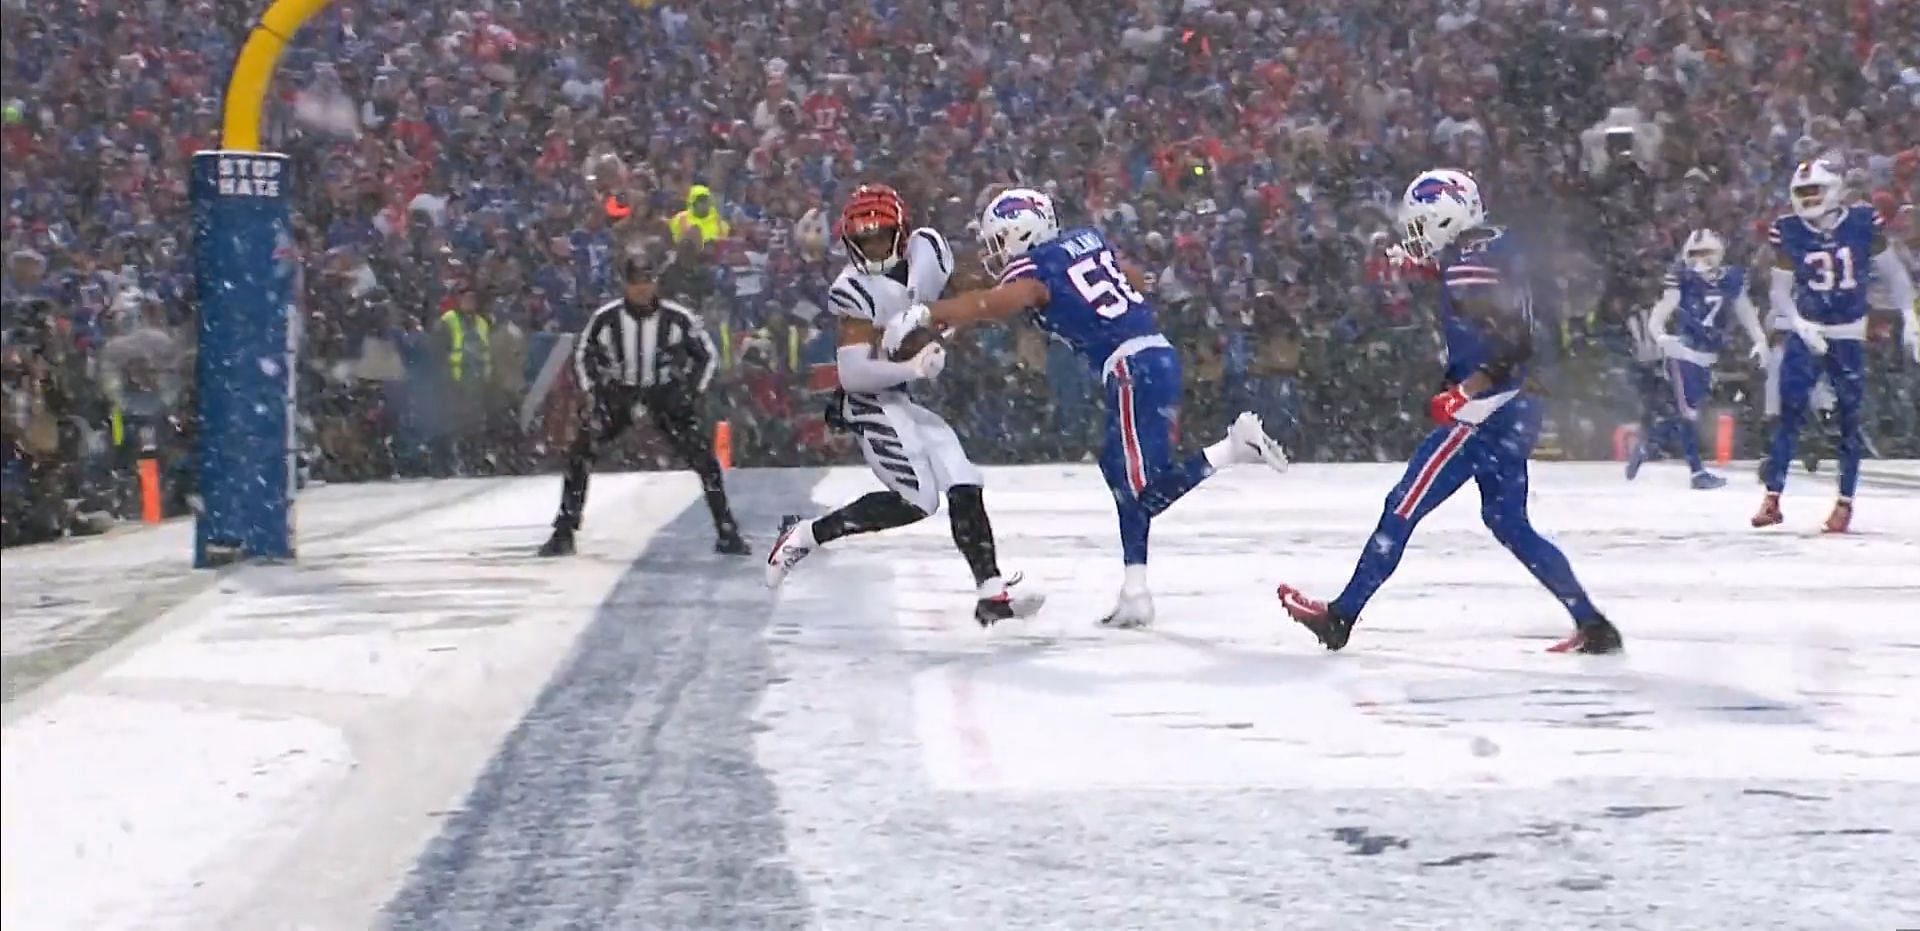 The Bengals thought they had a touchdown vs. the Bills.